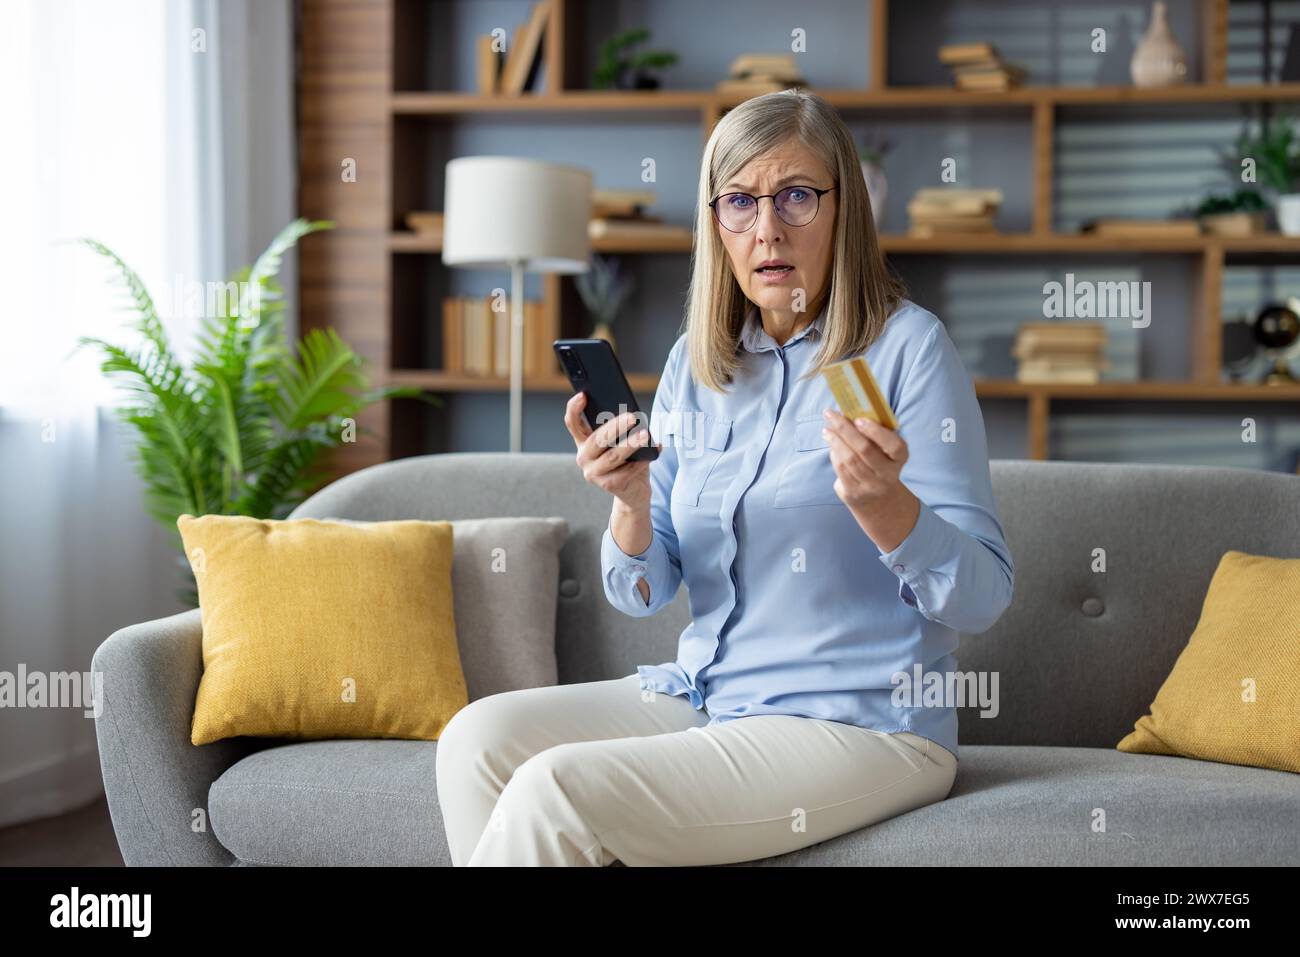 A mature adult woman examines her credit card while holding a smartphone, sitting comfortably on her couch at home, possibly suspicious of fraud. Stock Photo